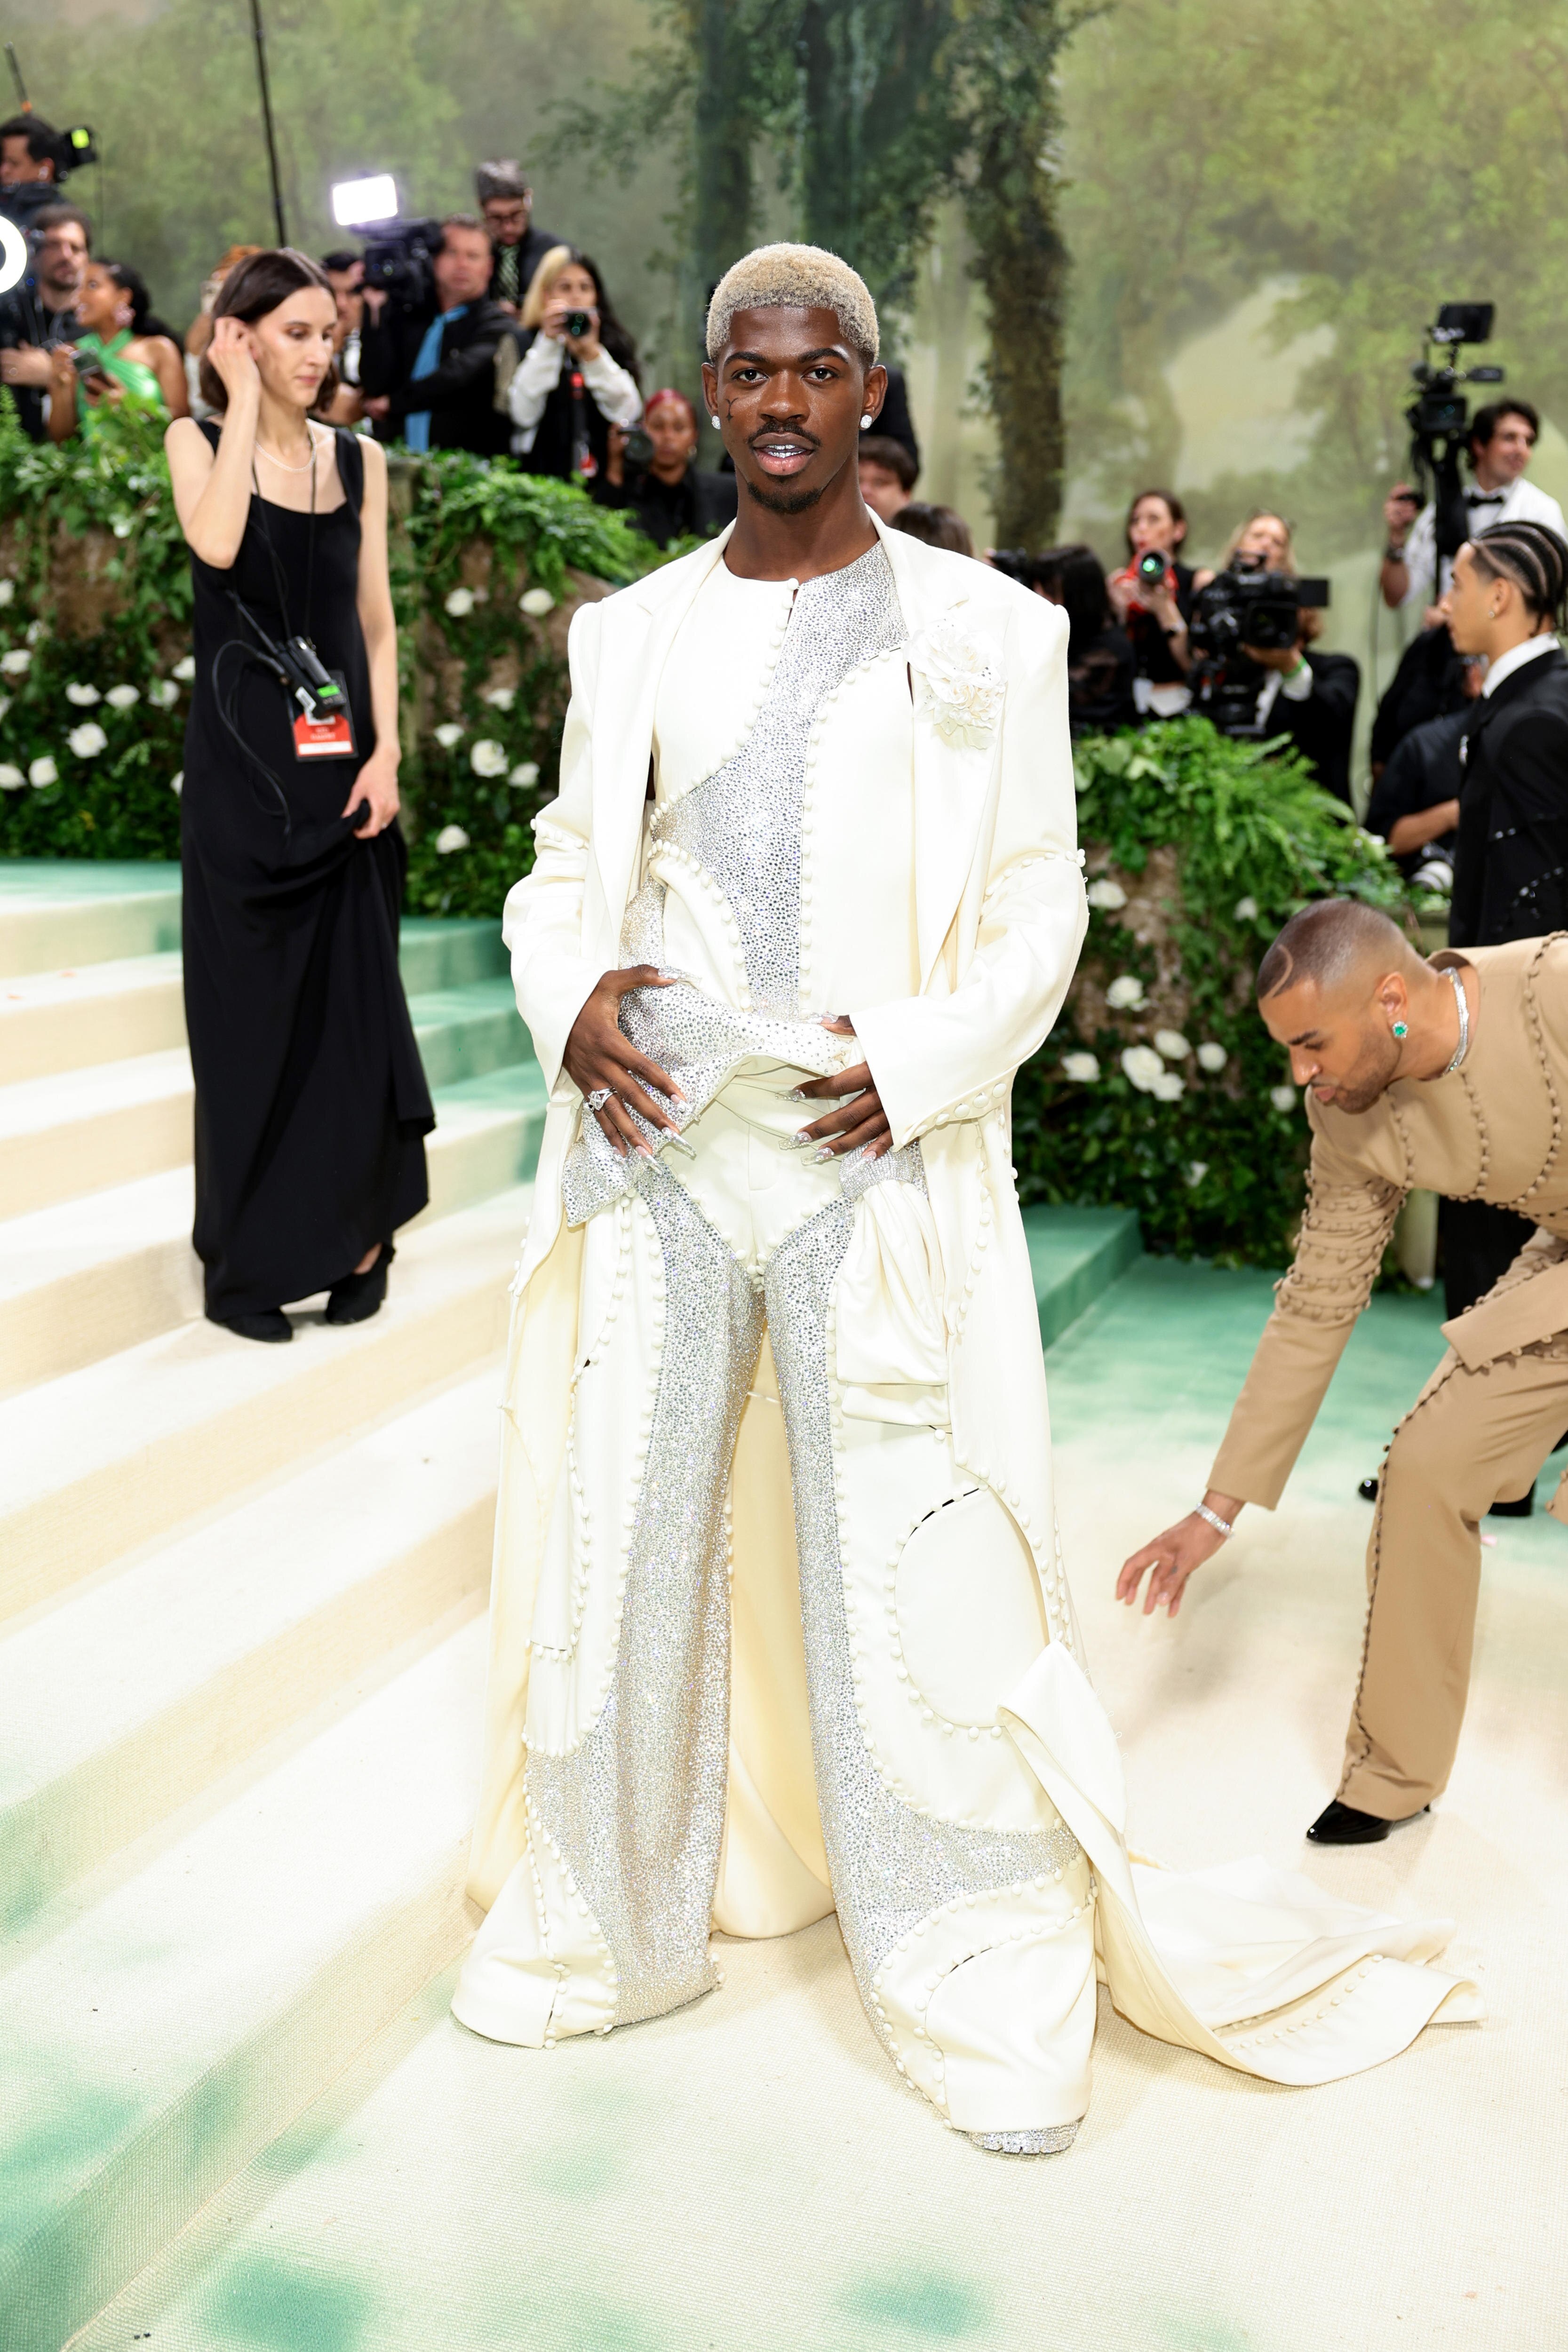 Lil Nas X stands in an all-white outfit of pants, coat and shirt, adorned with diamonds. His hair is buzzcut and bleached.